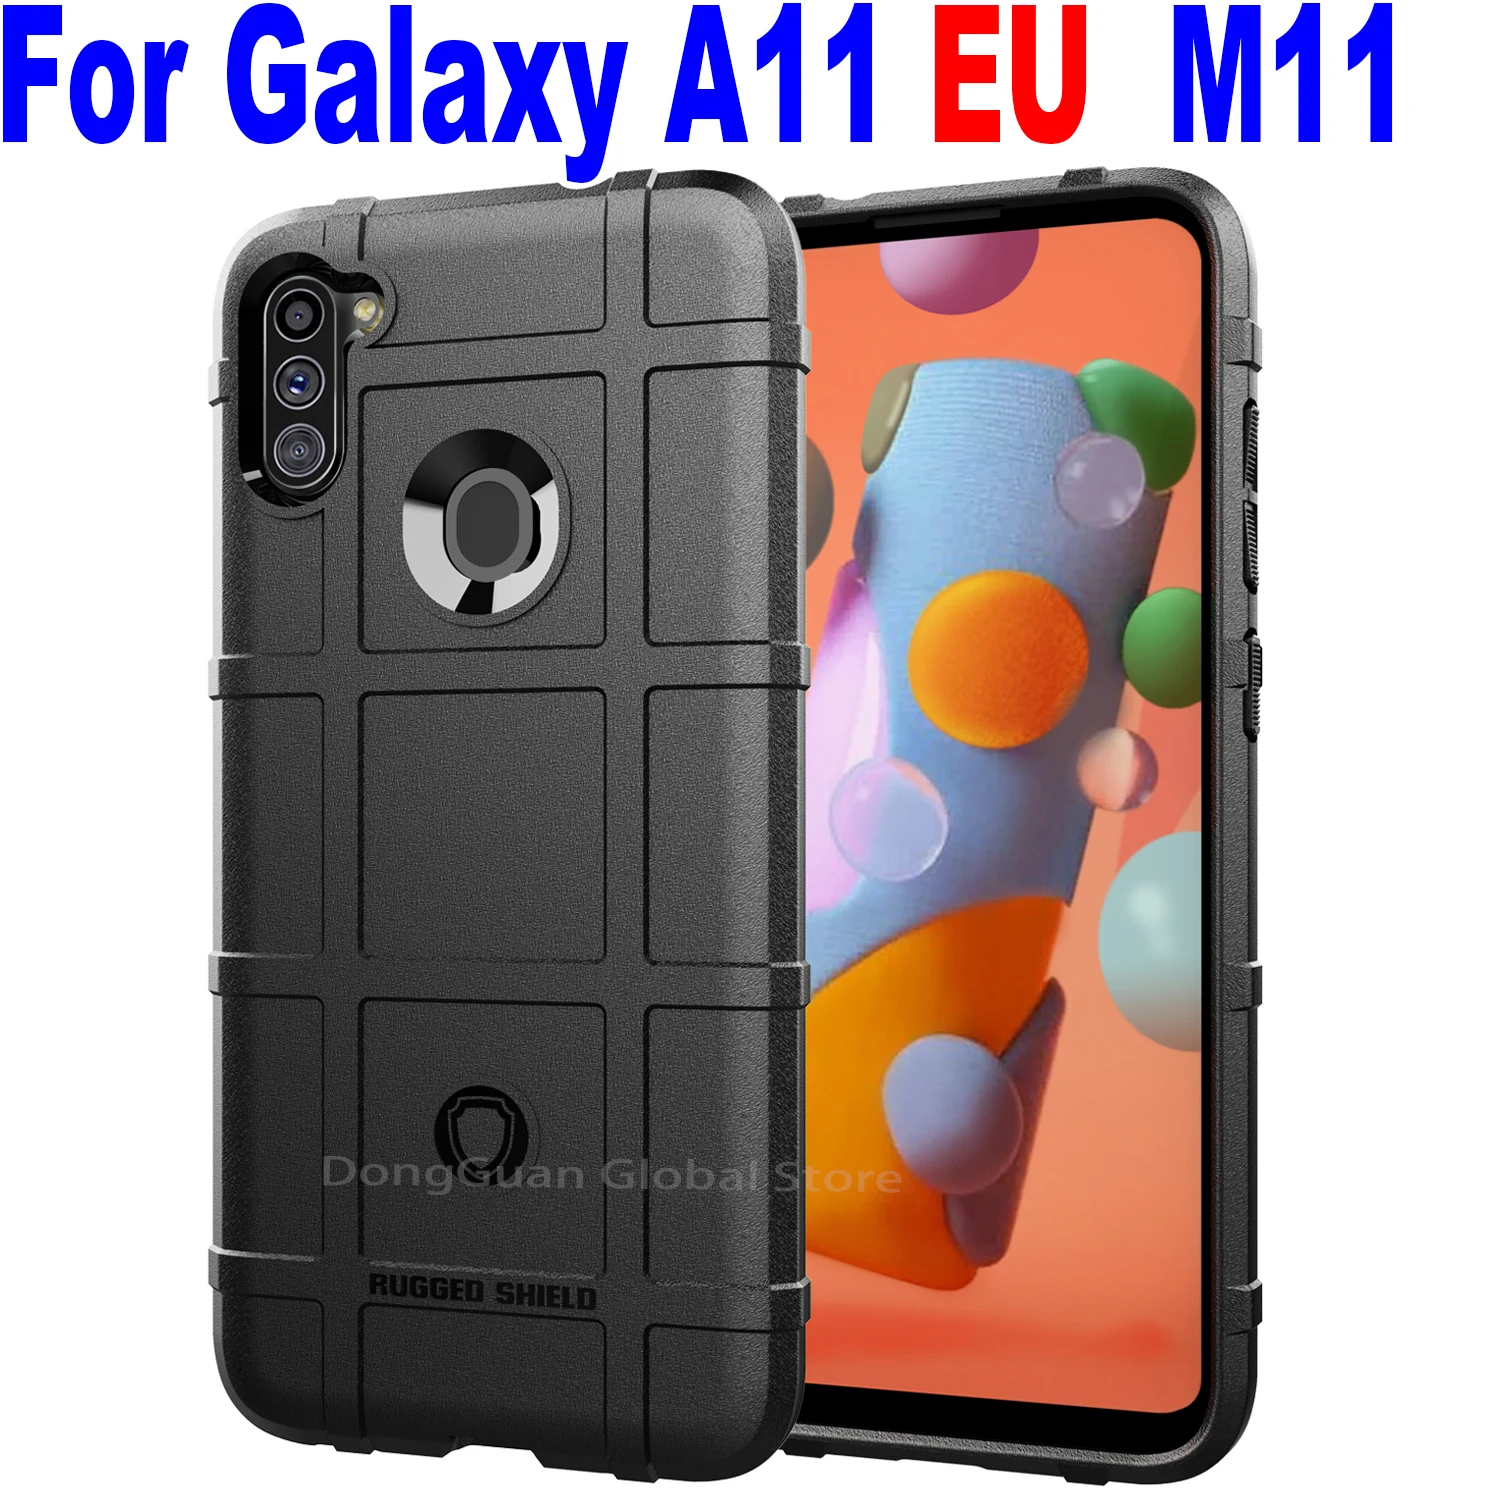 

Rugged Shield Shockproof Armor Case For Samsung Galaxy A11 M11 SM-A115 SM-M115 SM-S115 Cover Shell Case